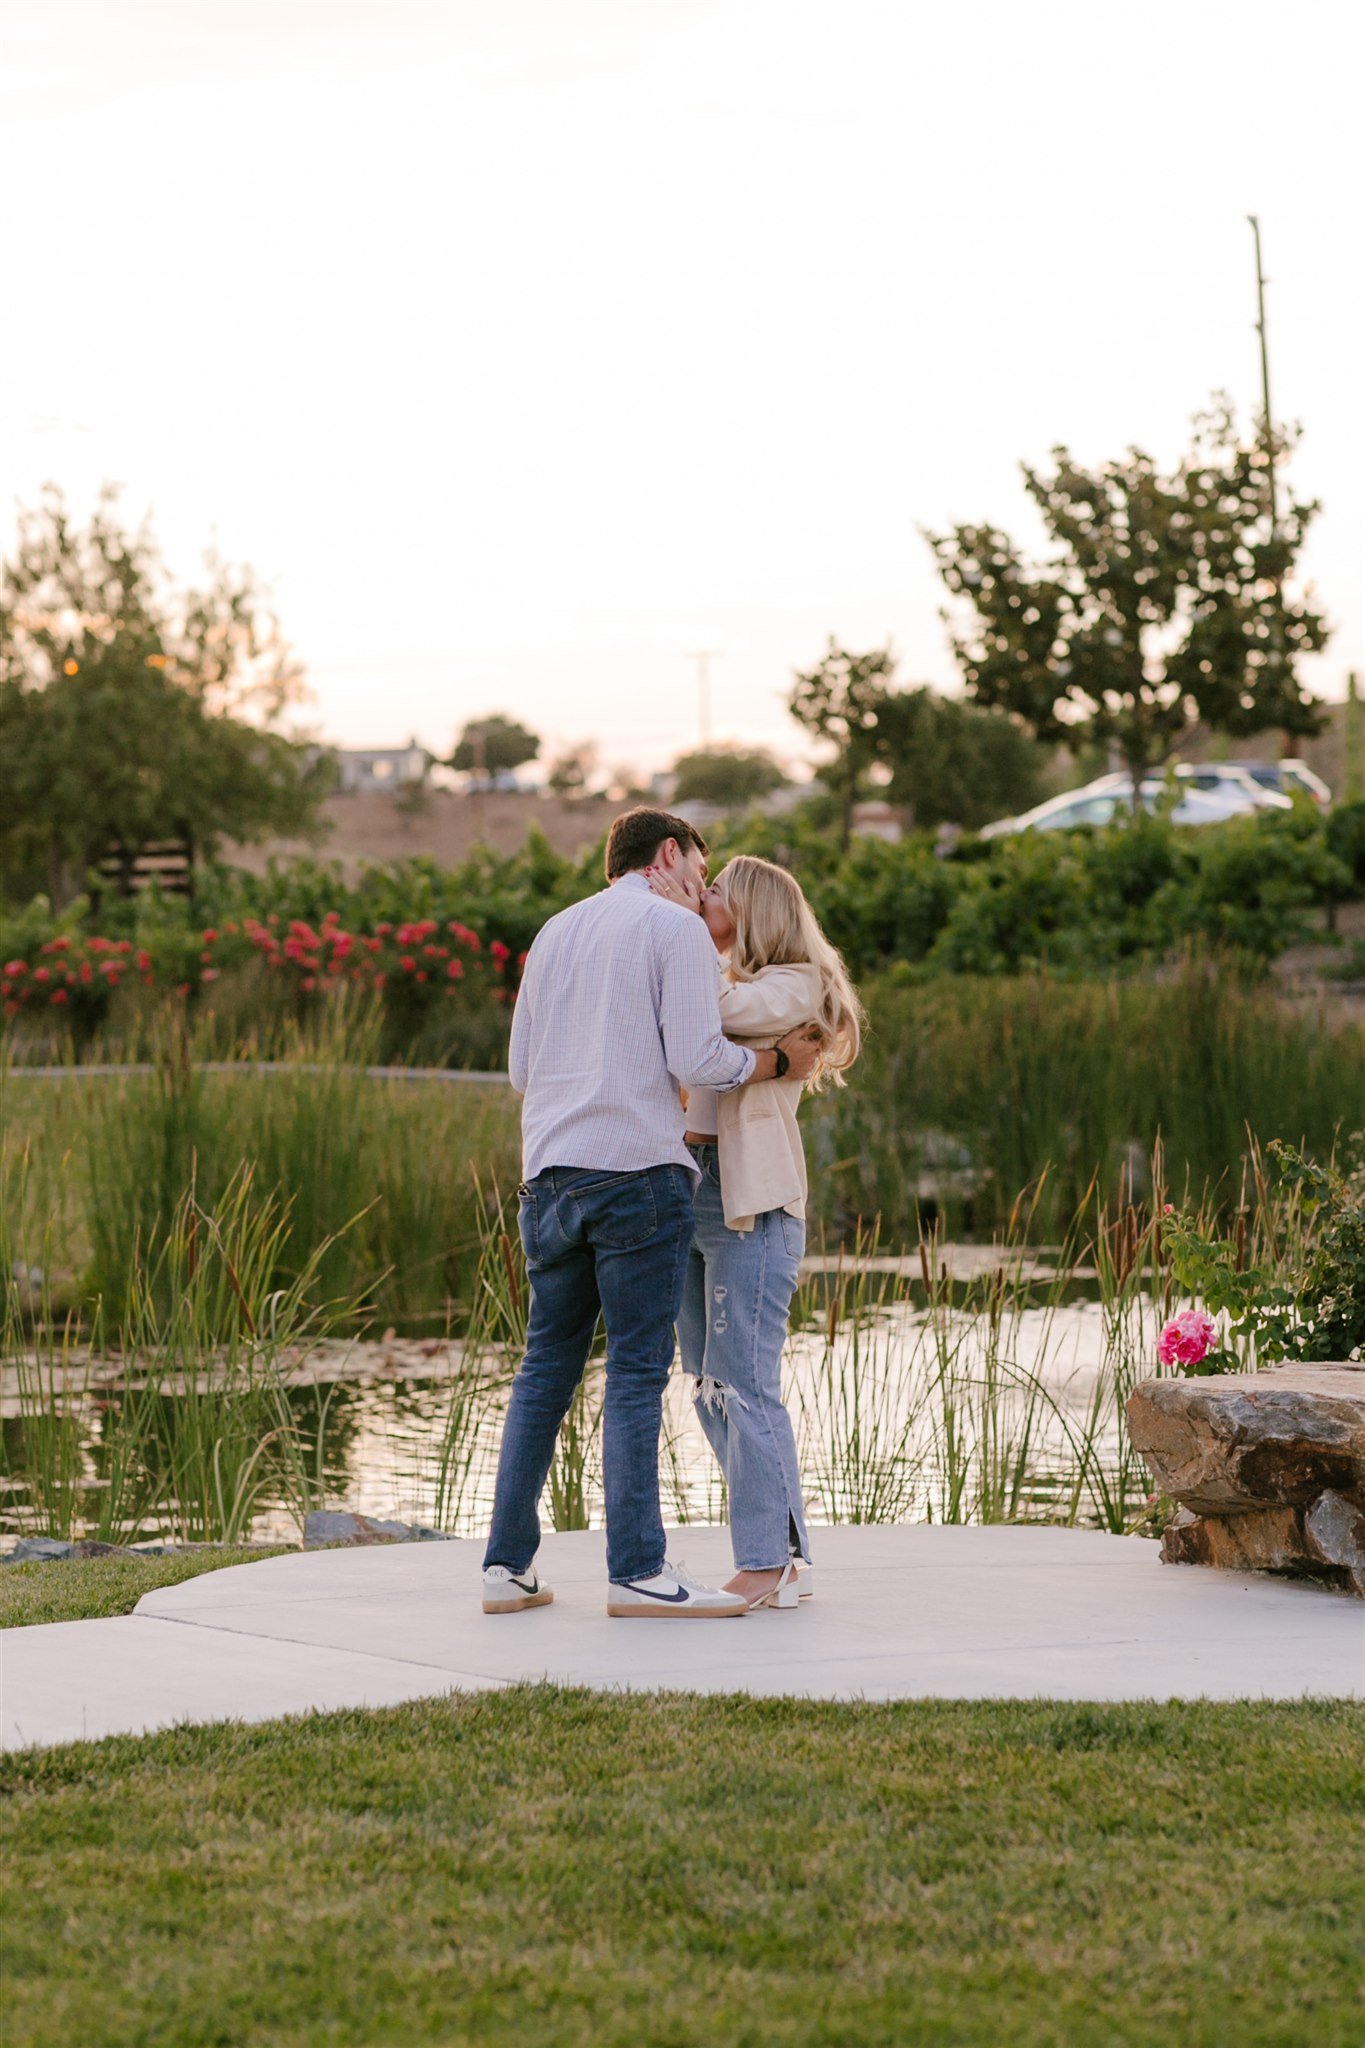 surprise proposal at temecula winery with sunset